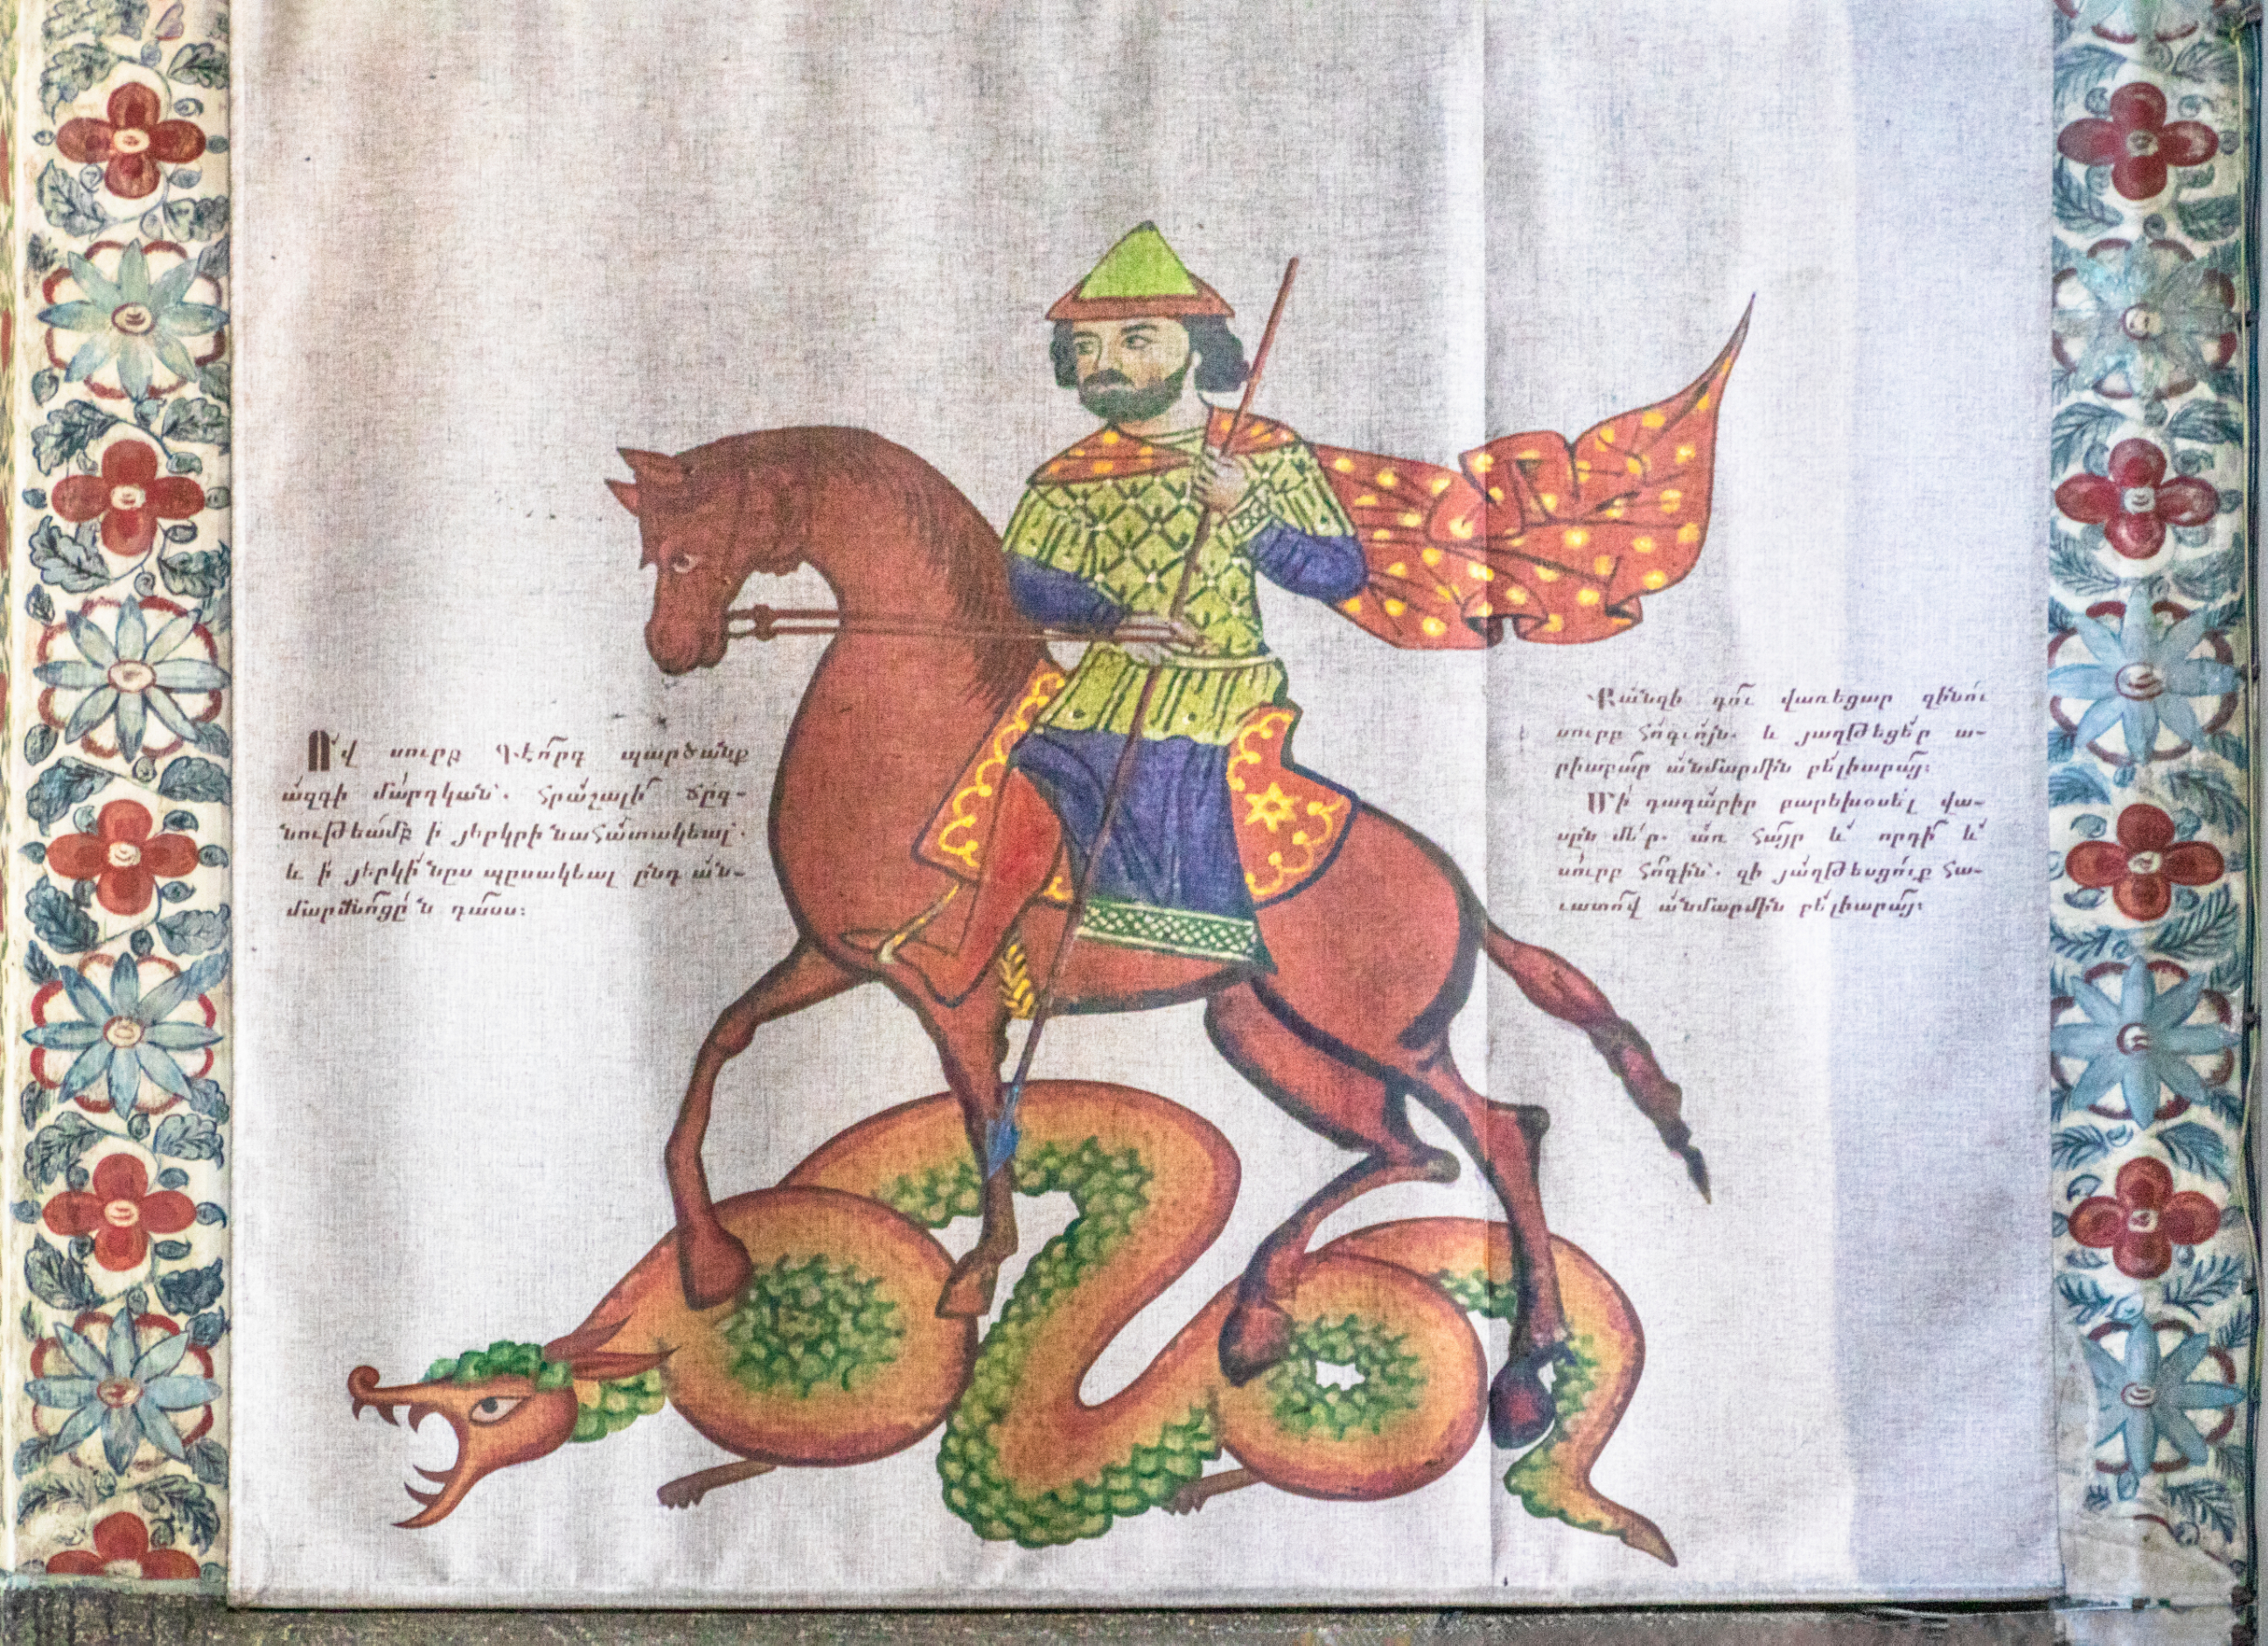 An old image of a man on a horse in colorful garments